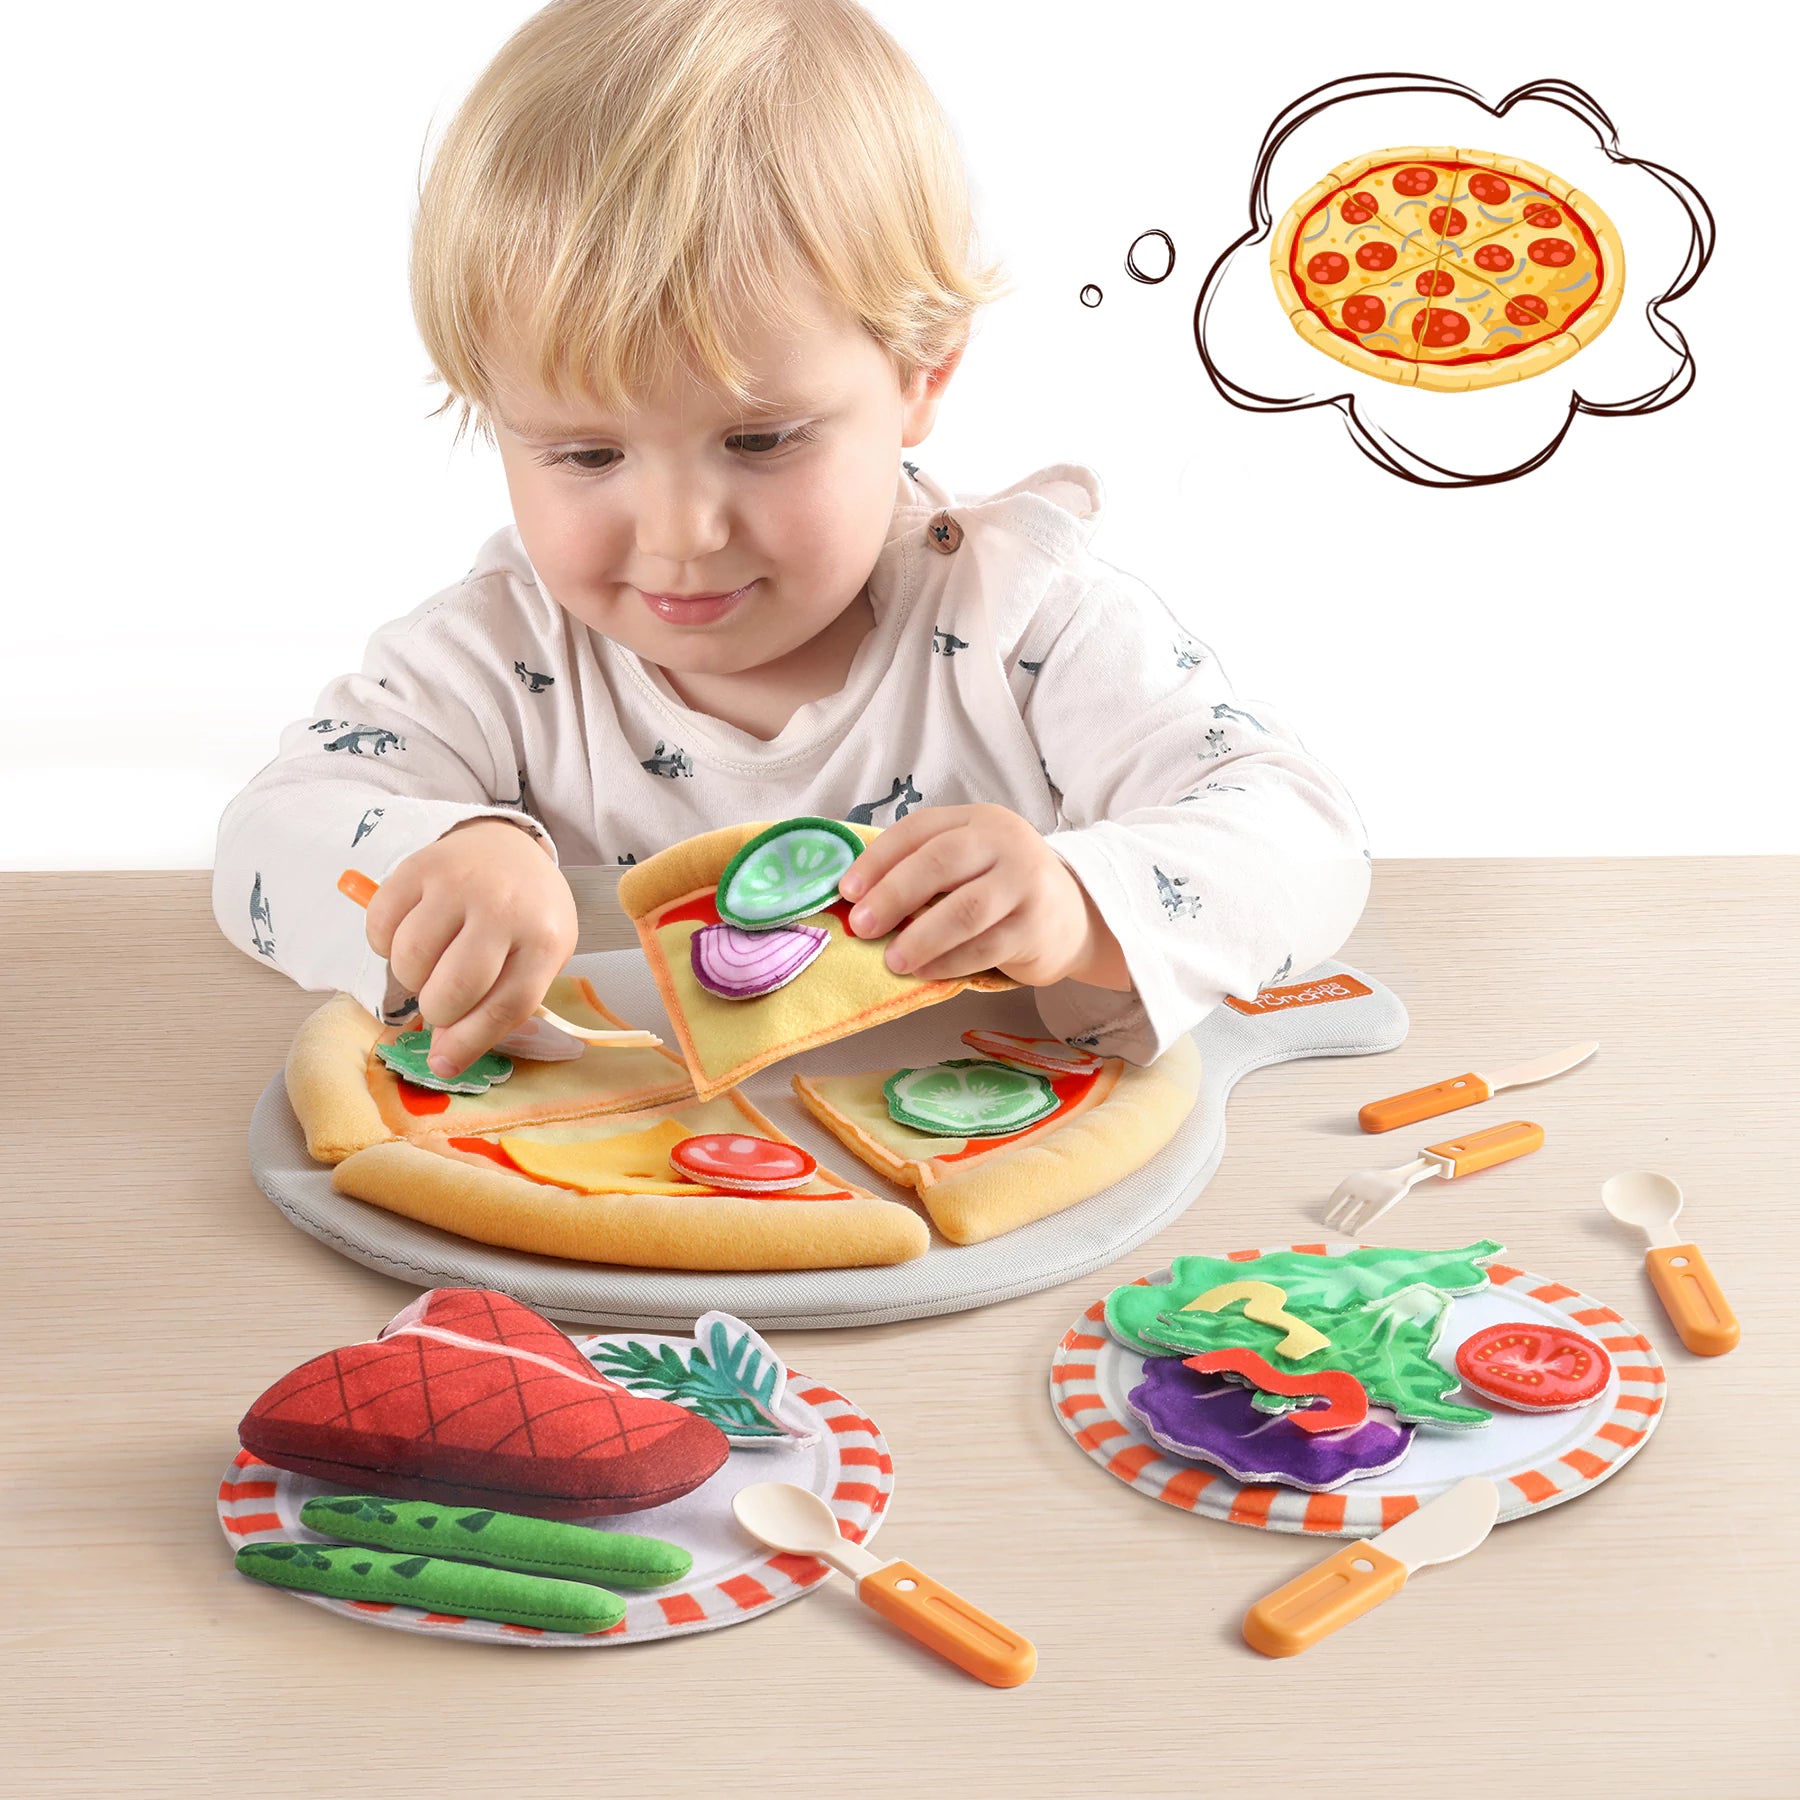 Simulation features in pizza, salad, and steak food play set